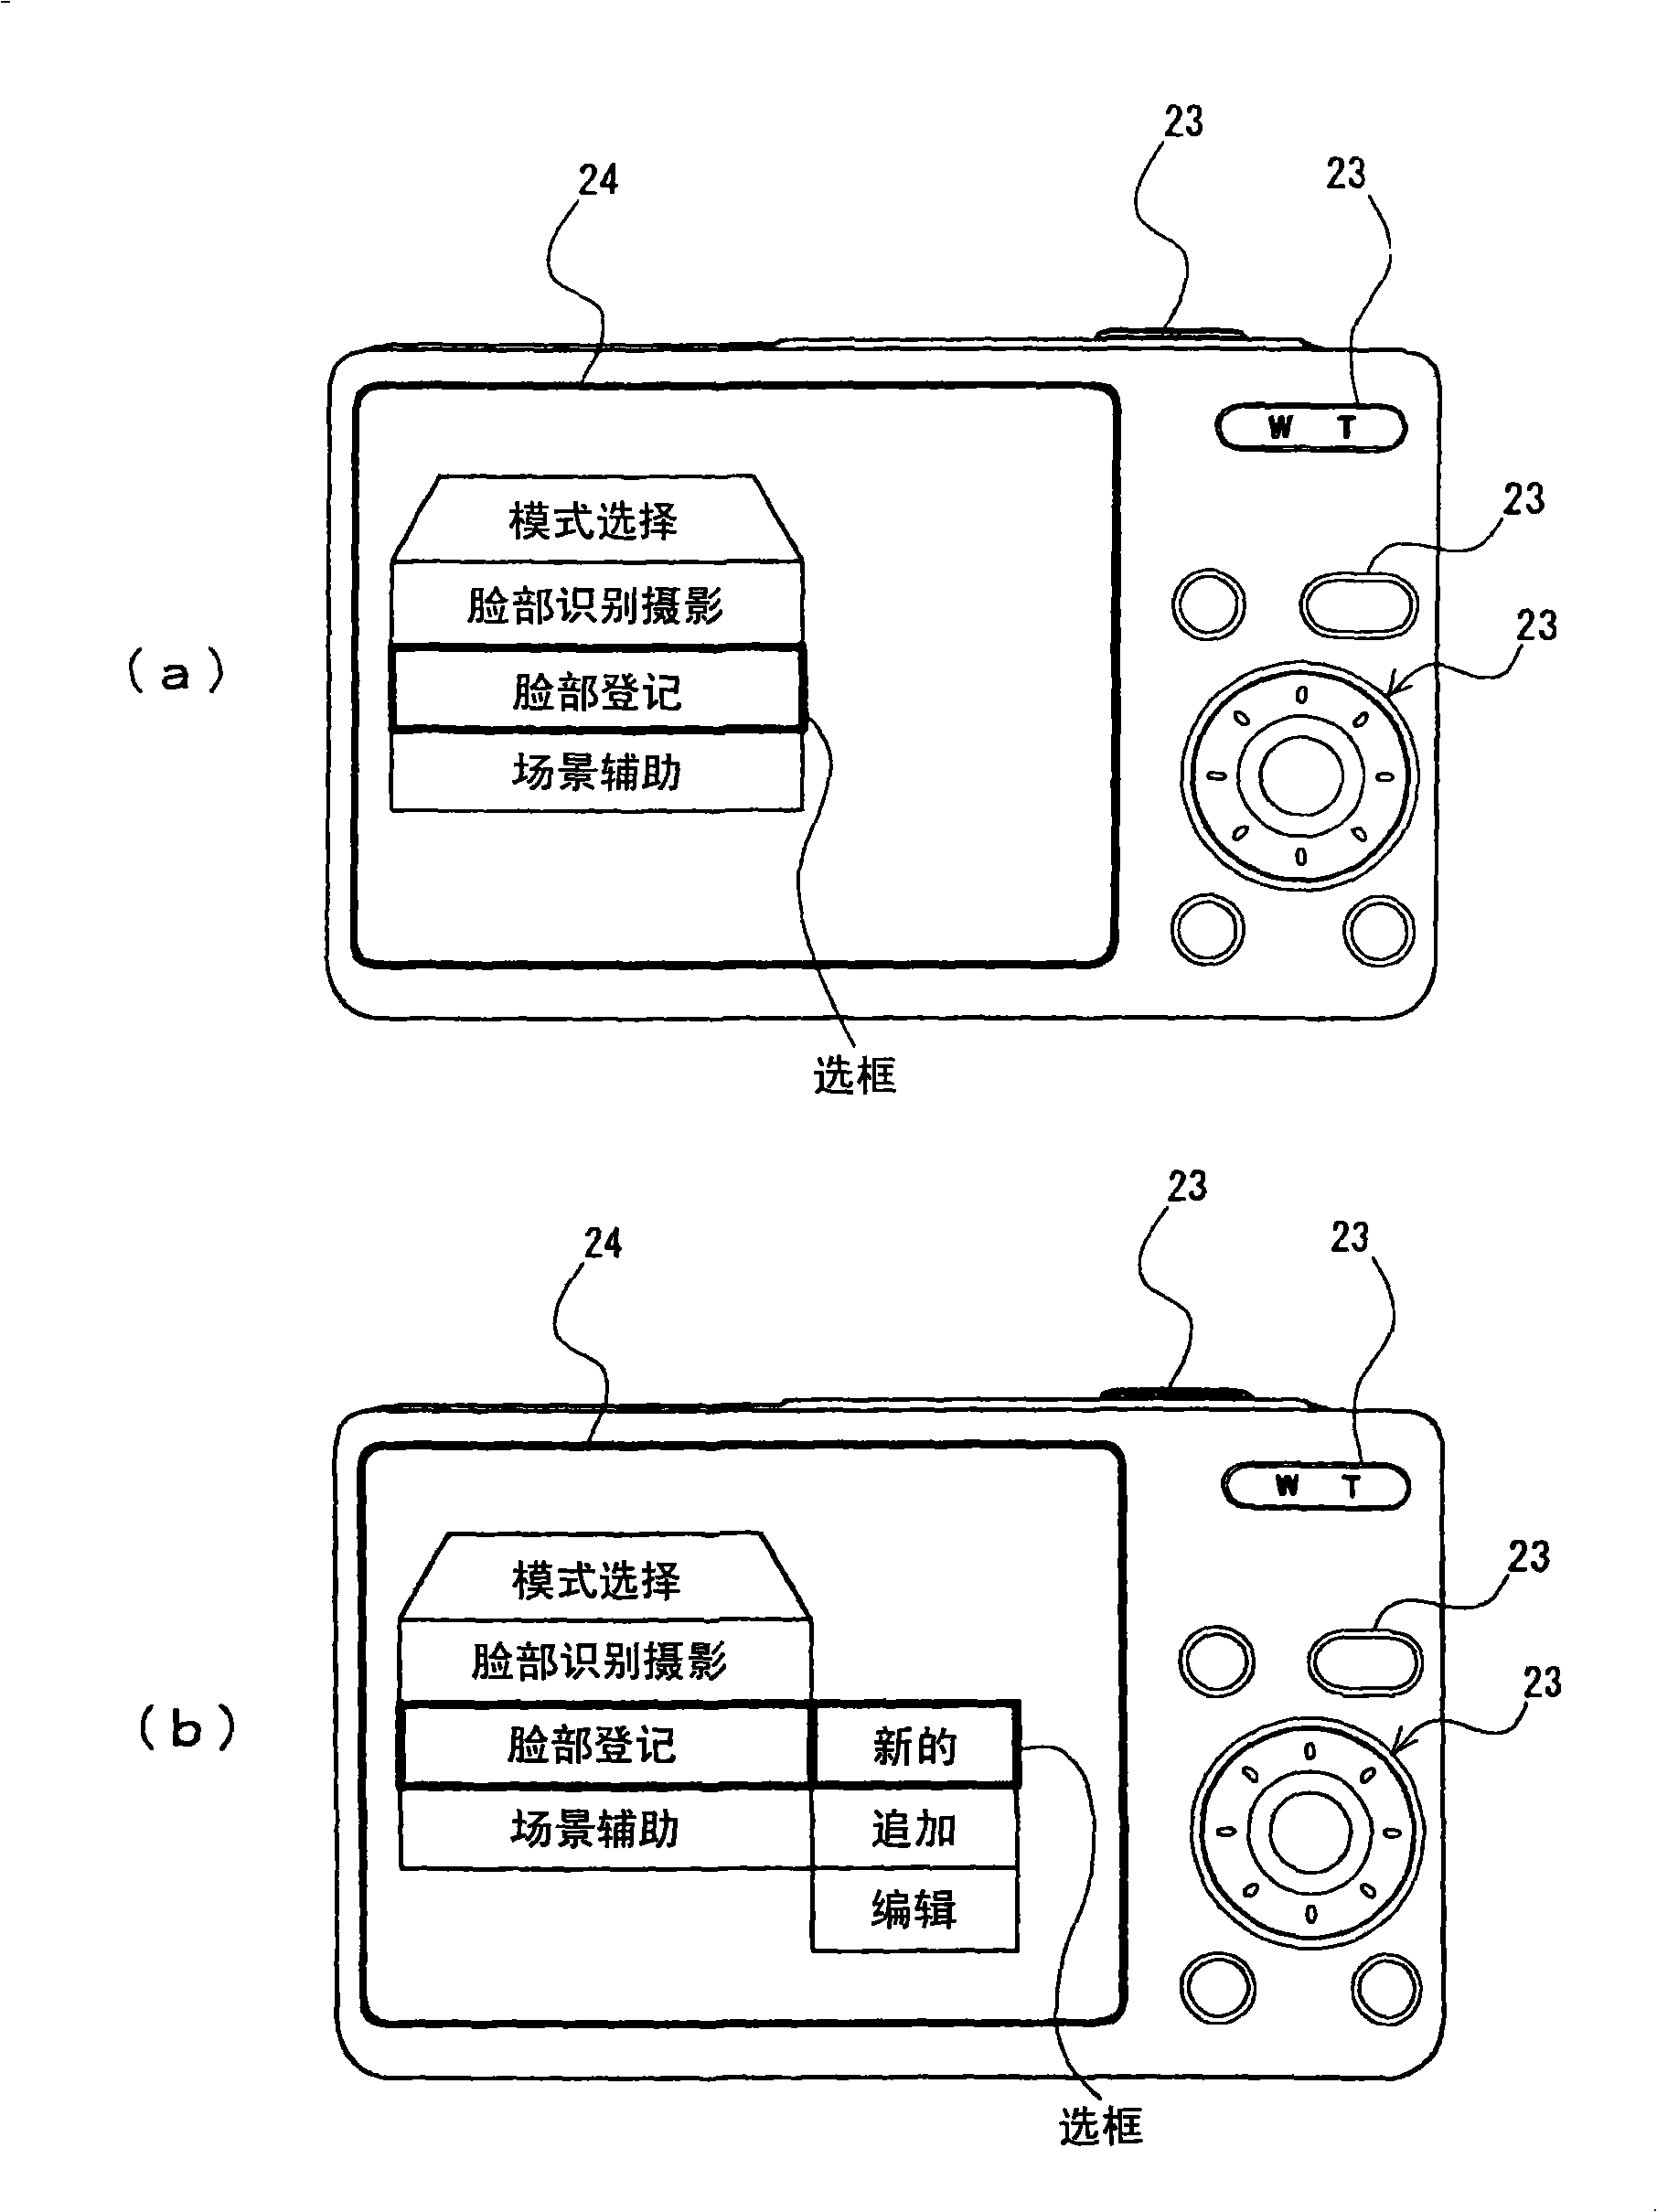 Electronic camera and image processing device